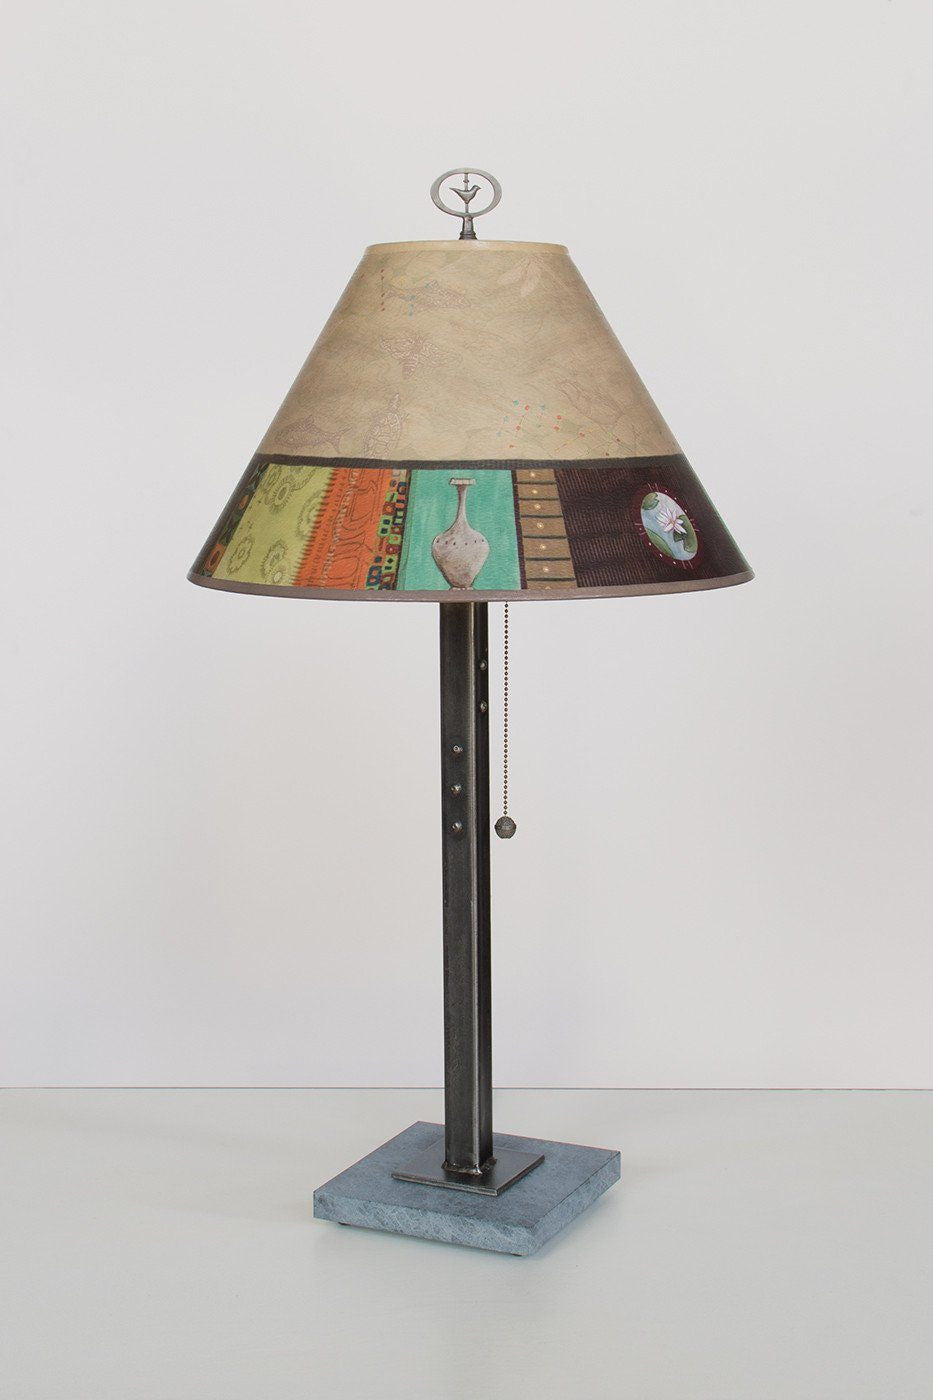 Janna Ugone & Co Table Lamps Steel Table Lamp with Medium Conical Shade in Linen Match